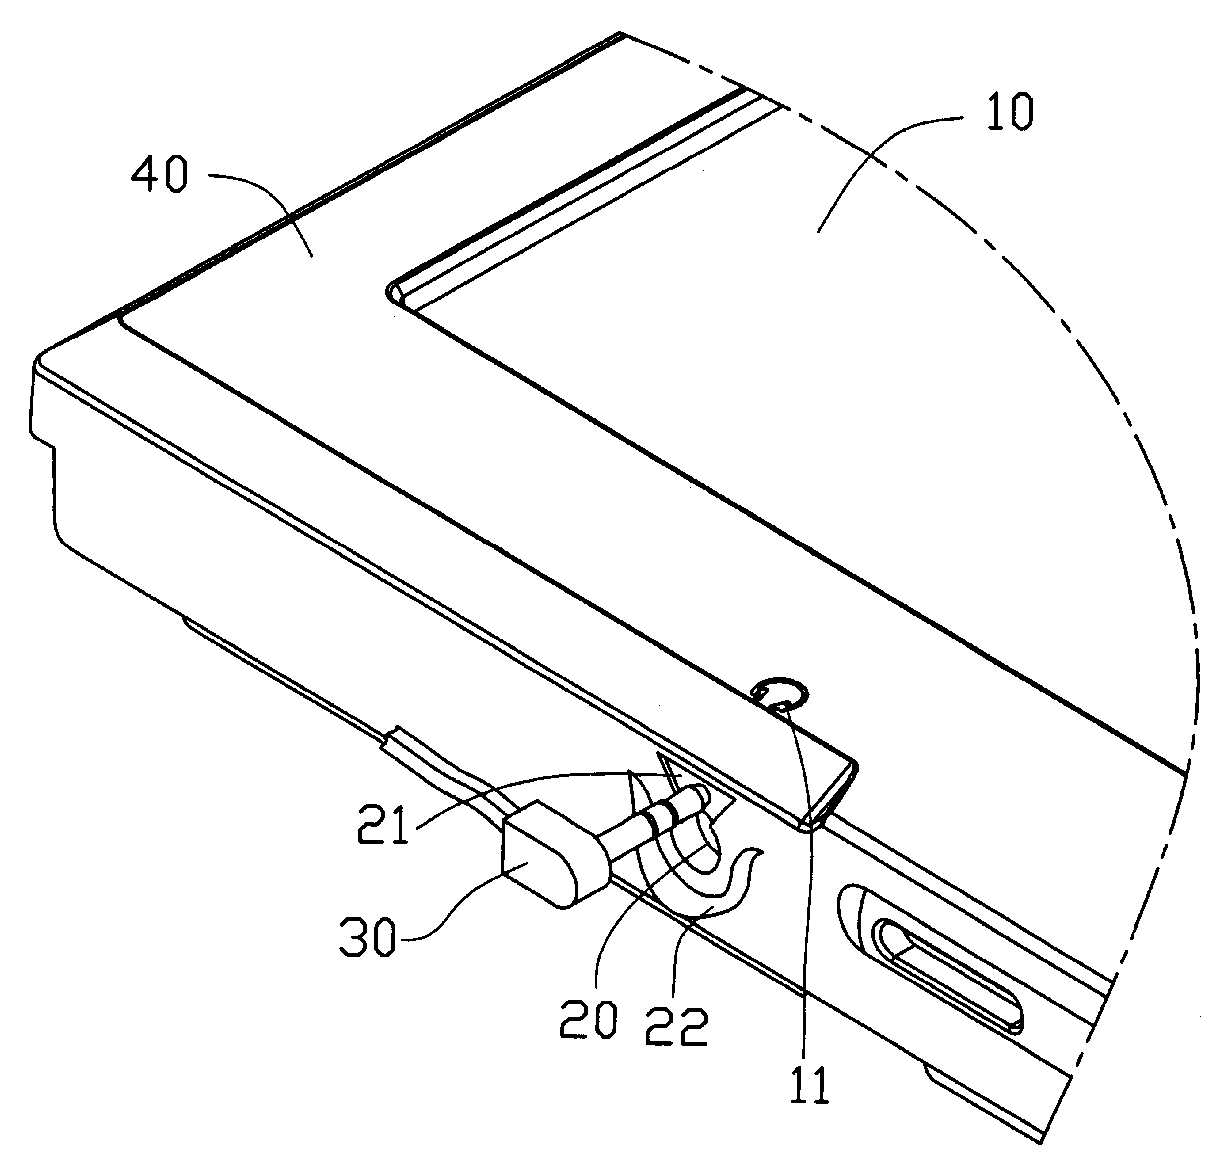 Display device with a jack